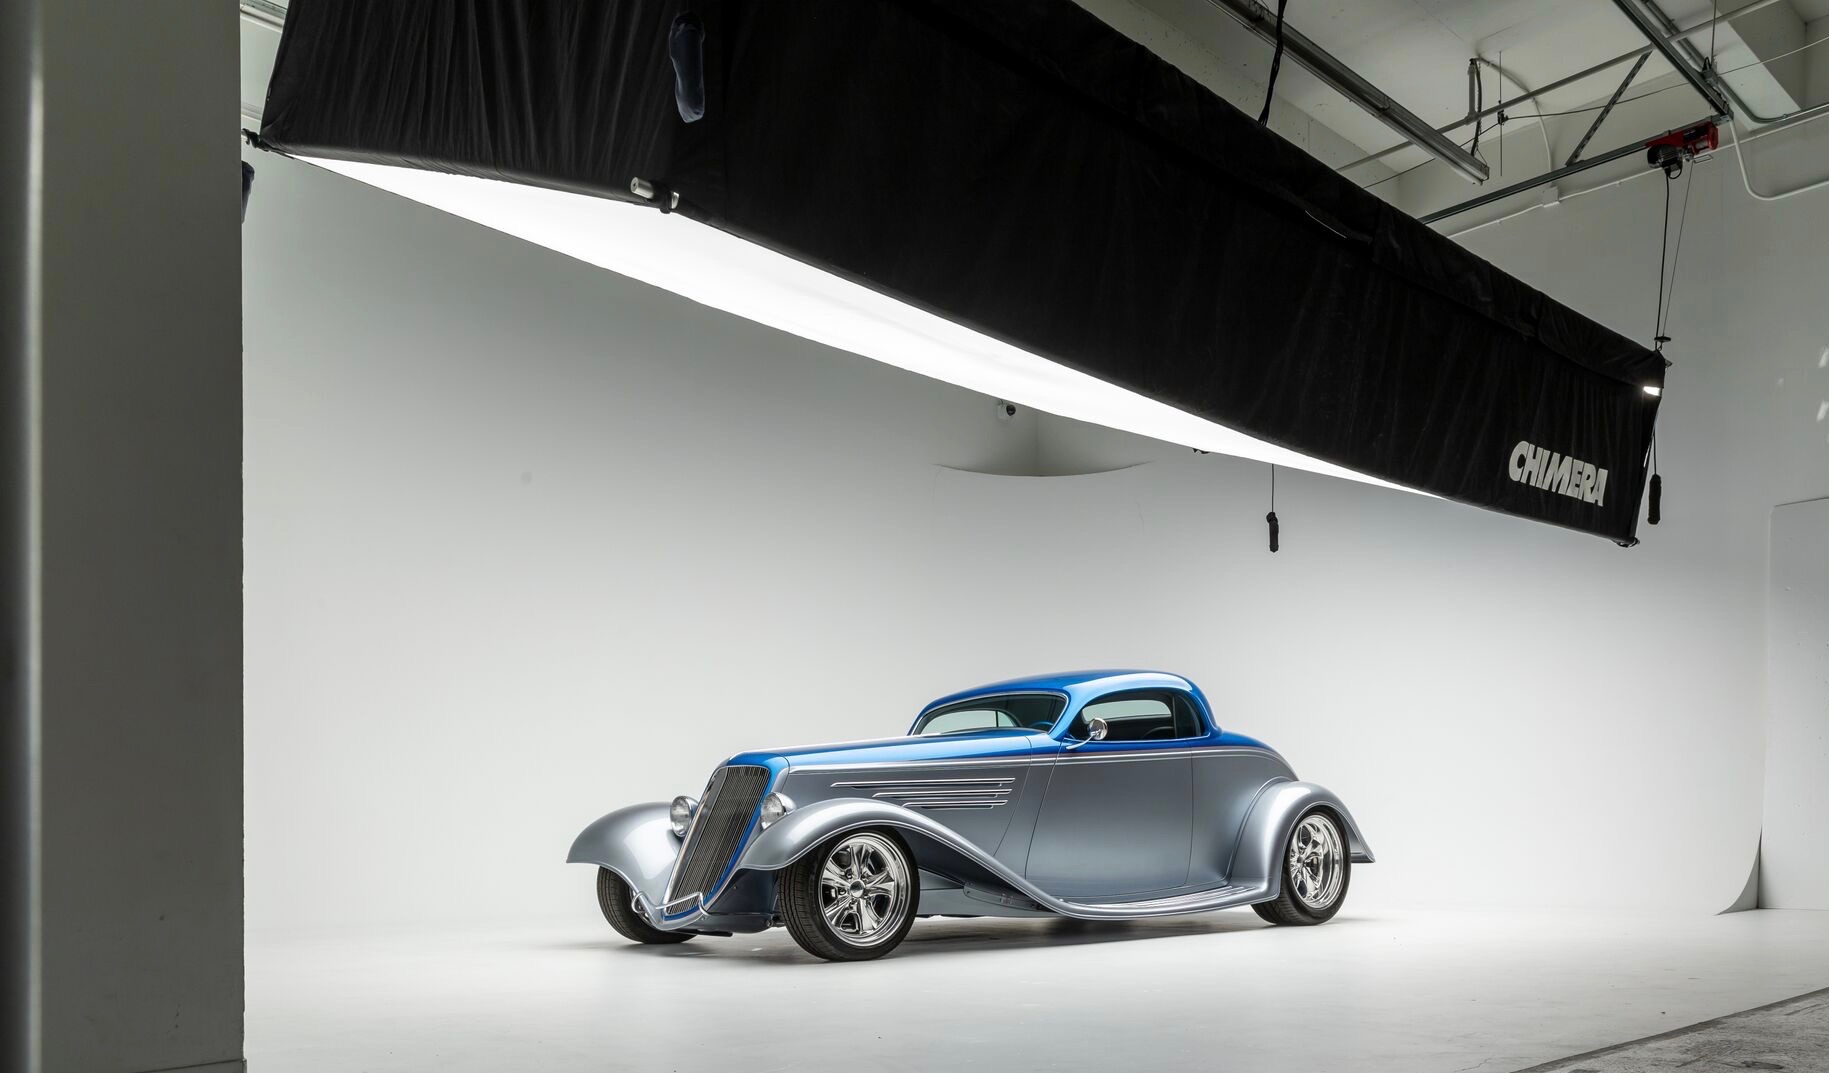 Petersen museum, Petersen remembers Jessi Combs with special temporary exhibit, ClassicCars.com Journal